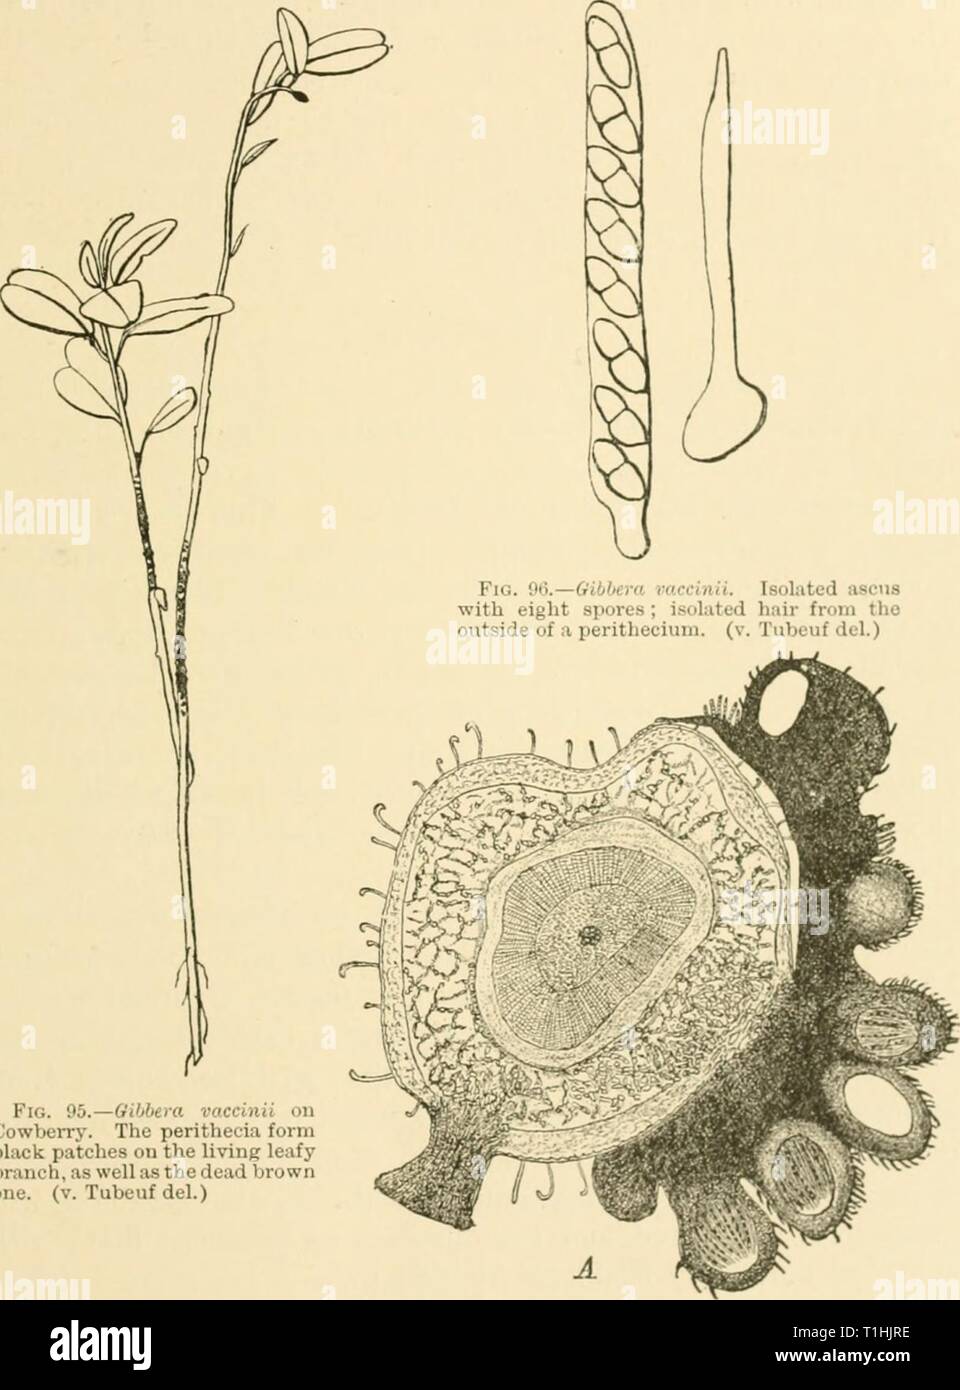 Diseases of plants induced by Diseases of plants induced by cryptogamic parasites; introduction to the study of pathogenic Fungi, slime-Fungi, bacteria, & Algae  diseasesofplants00tube Year: 1897  •205 twigs brown and dead (Fig. 95). If more closely examined, the twigs will be found to bear patches of coal-black,    Fig. 05.—Gibbera Cowberry. The perithecia form black patches on the living leafy branch, as well as the dead brown one. (v. Tubeuf del.) Fig. 07.—6ibbera vaccinii. Cross-section of Cowberry showing a patch of perithecia in section ; the hairy perithecia contain paraphvses and asci  Stock Photo